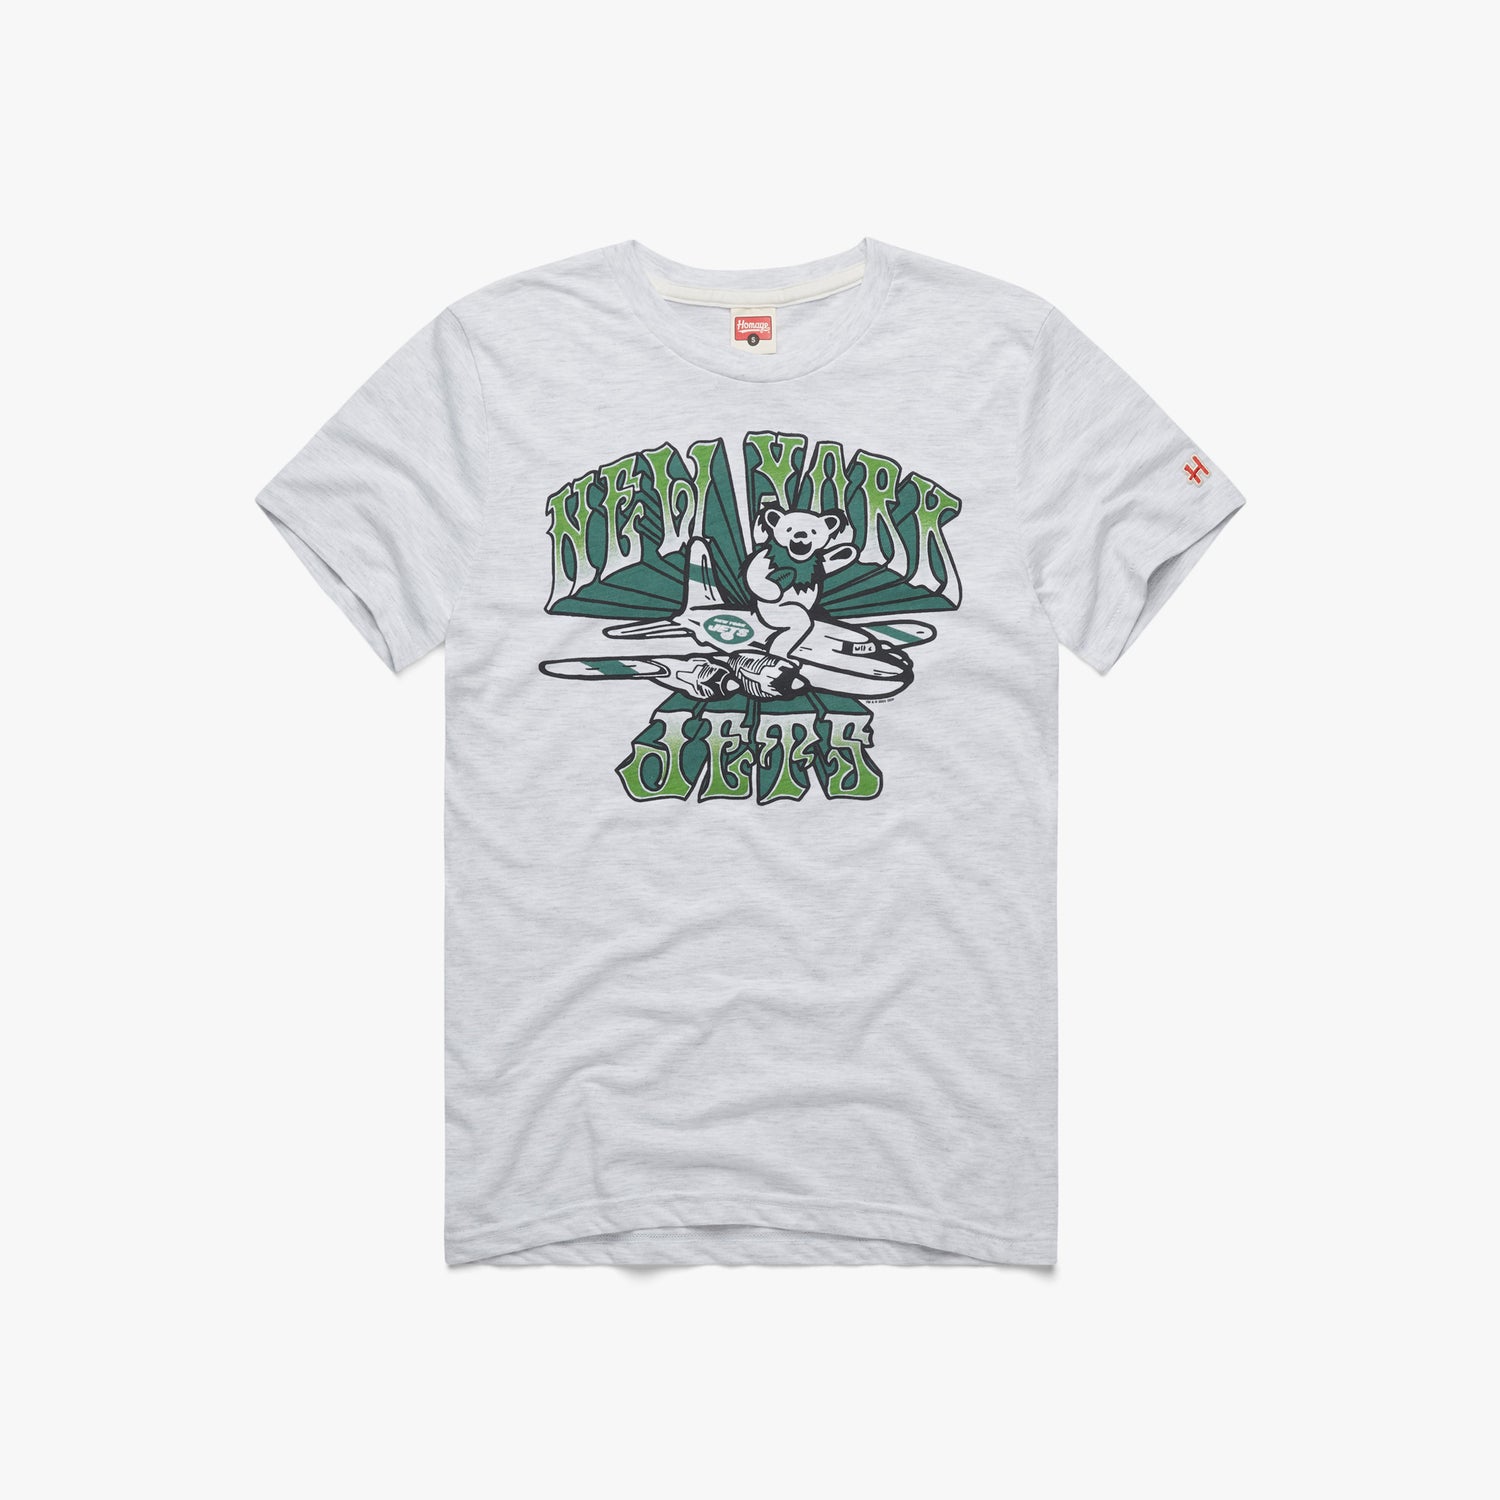 NFL x Grateful Dead x New York Jets T-Shirt from Homage. | Officially Licensed Vintage NFL Apparel from Homage Pro Shop.